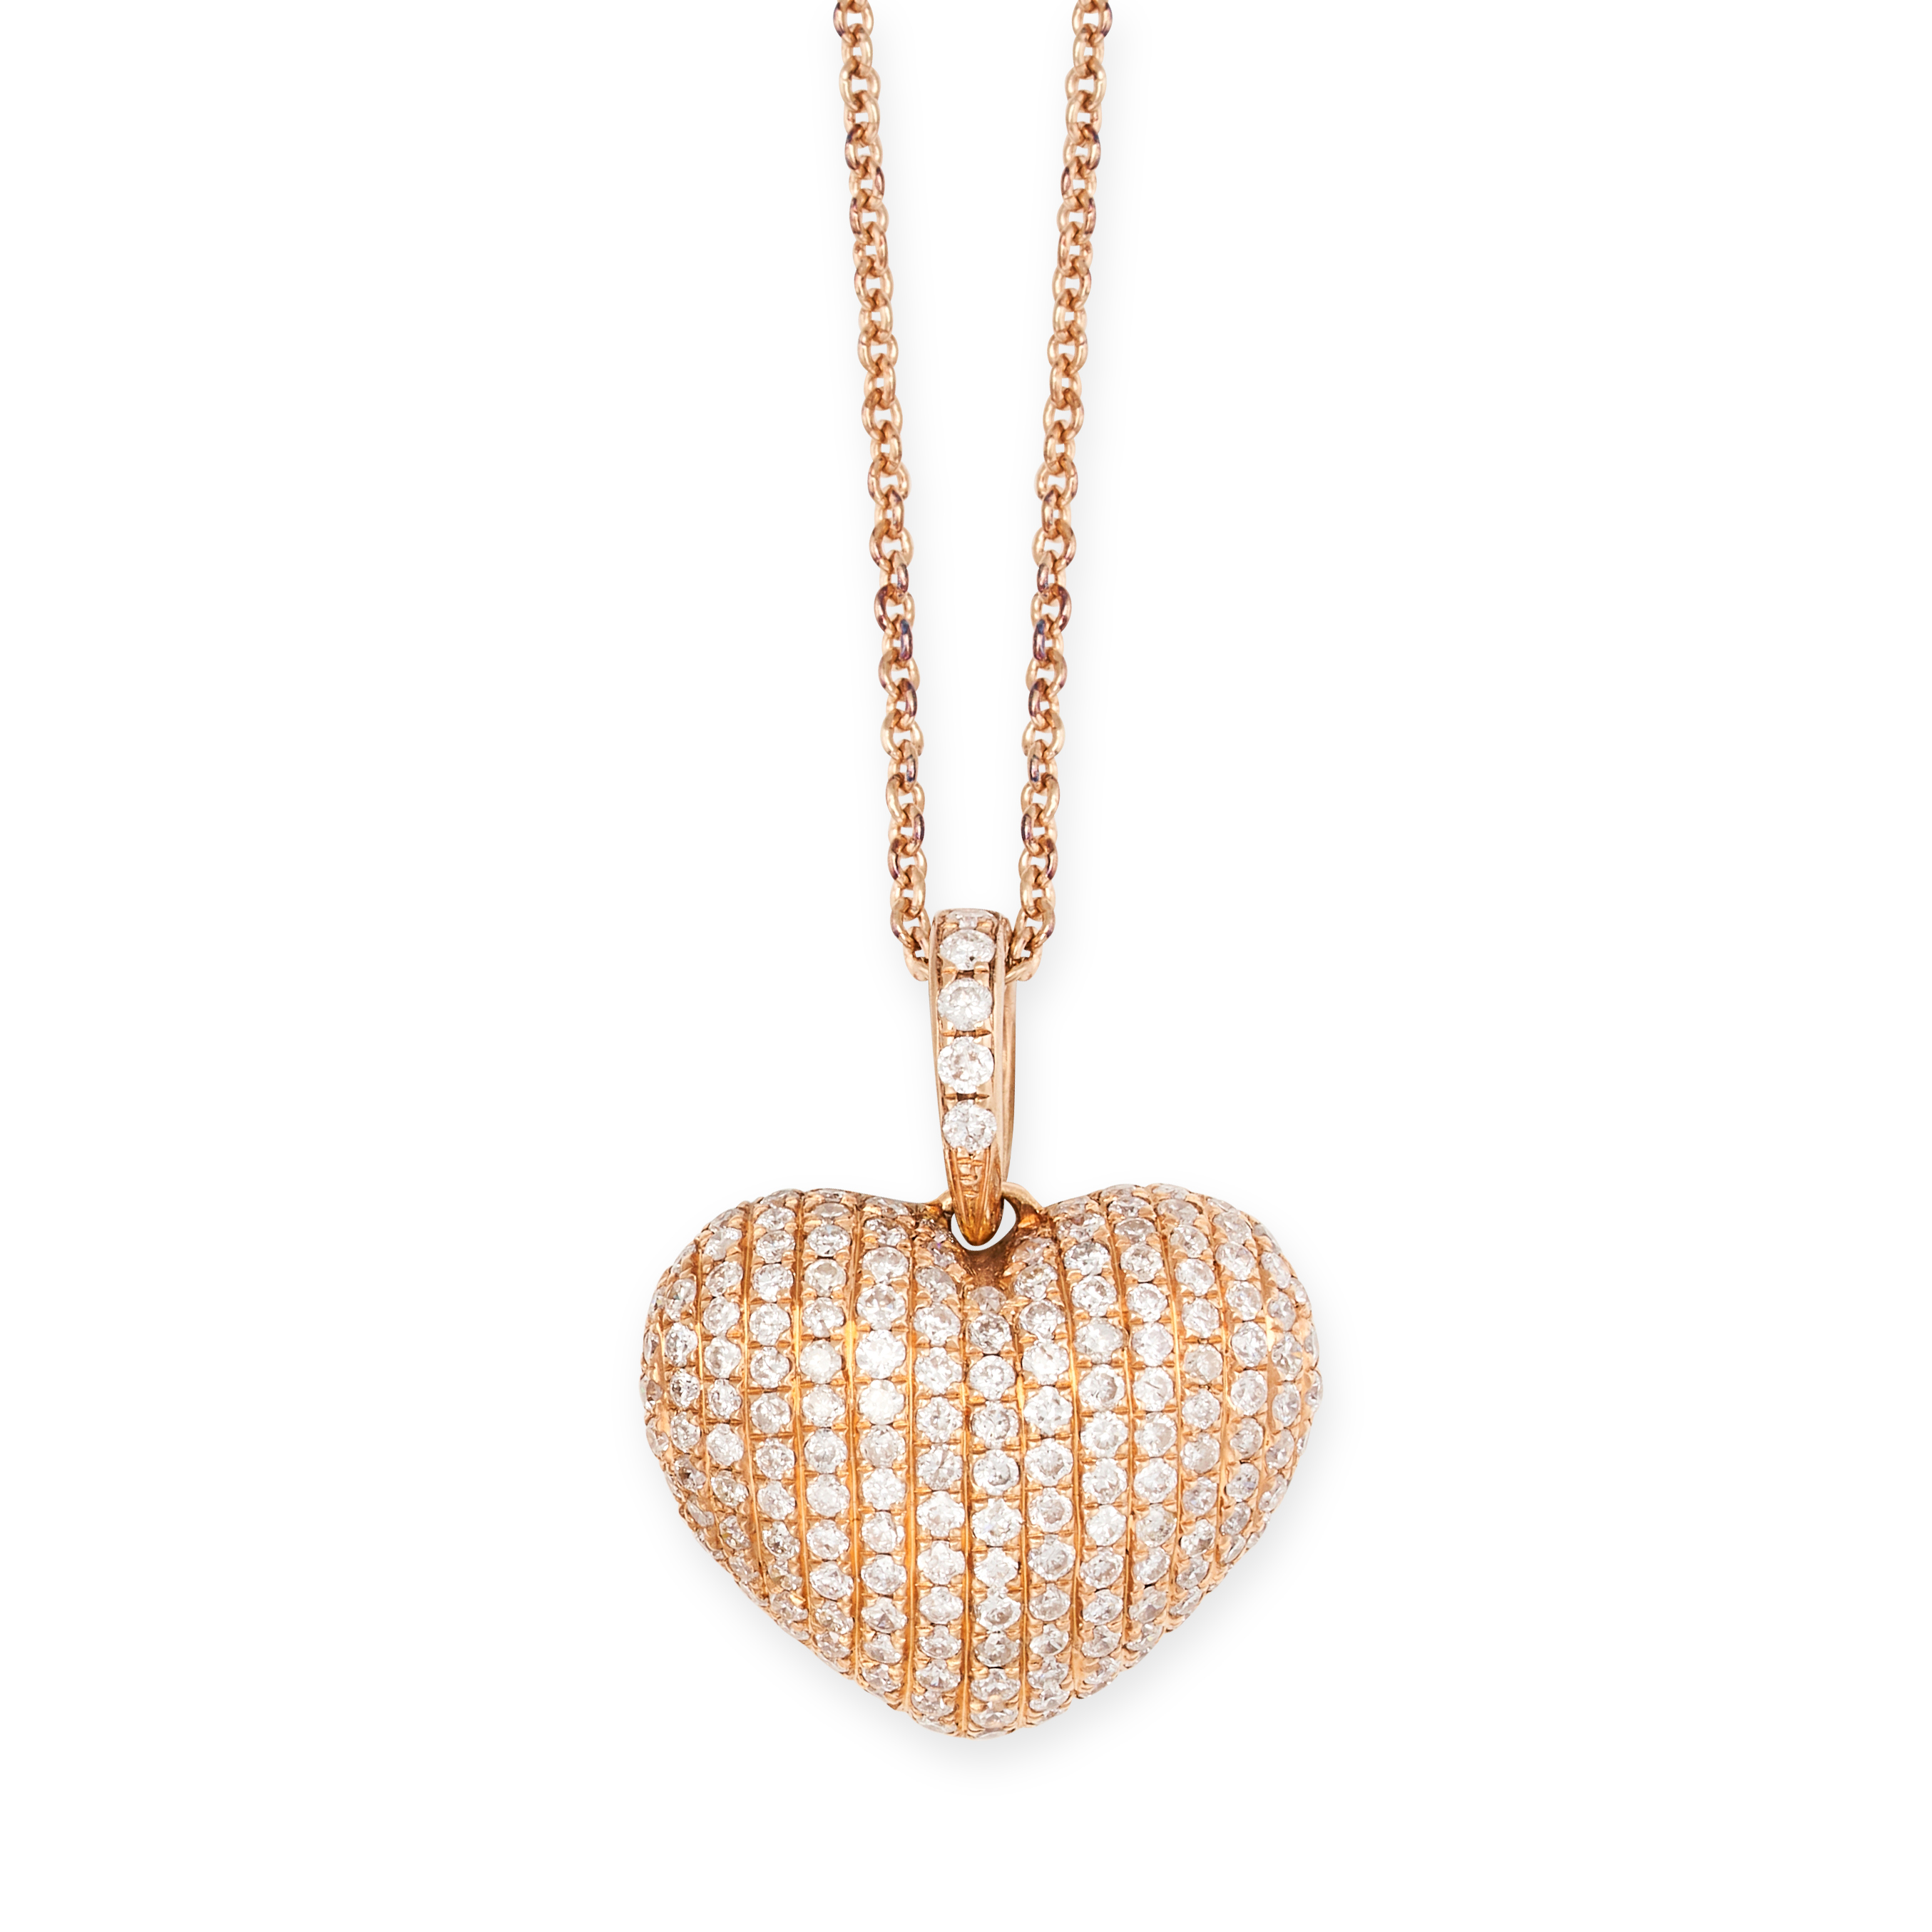 A DIAMOND HEART PENDANT AND CHAIN the pendant set with rows of round cut diamonds, suspended from